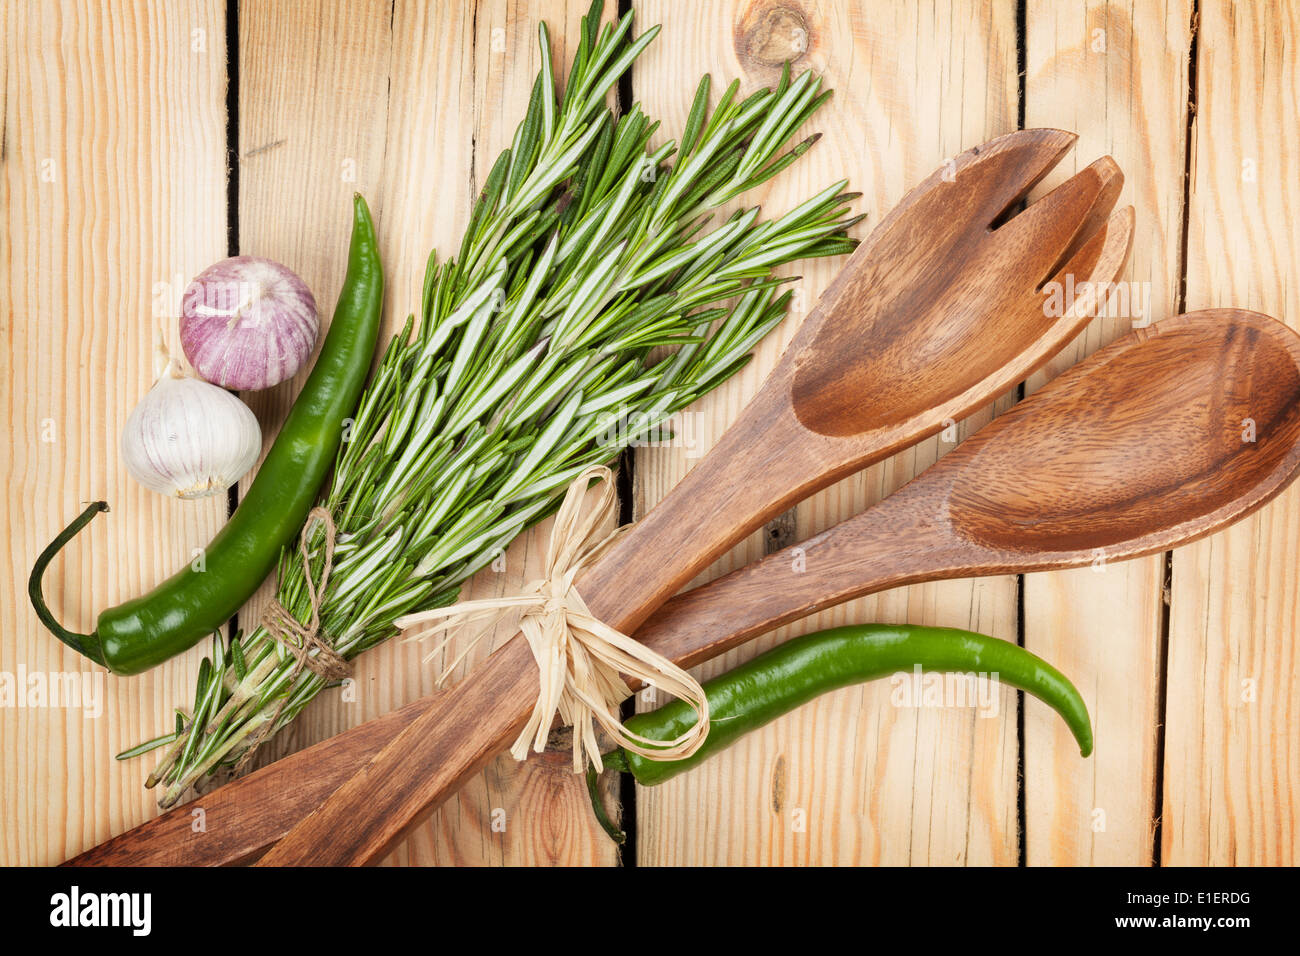 Herbs, spices and utensil on wooden table background Stock Photo